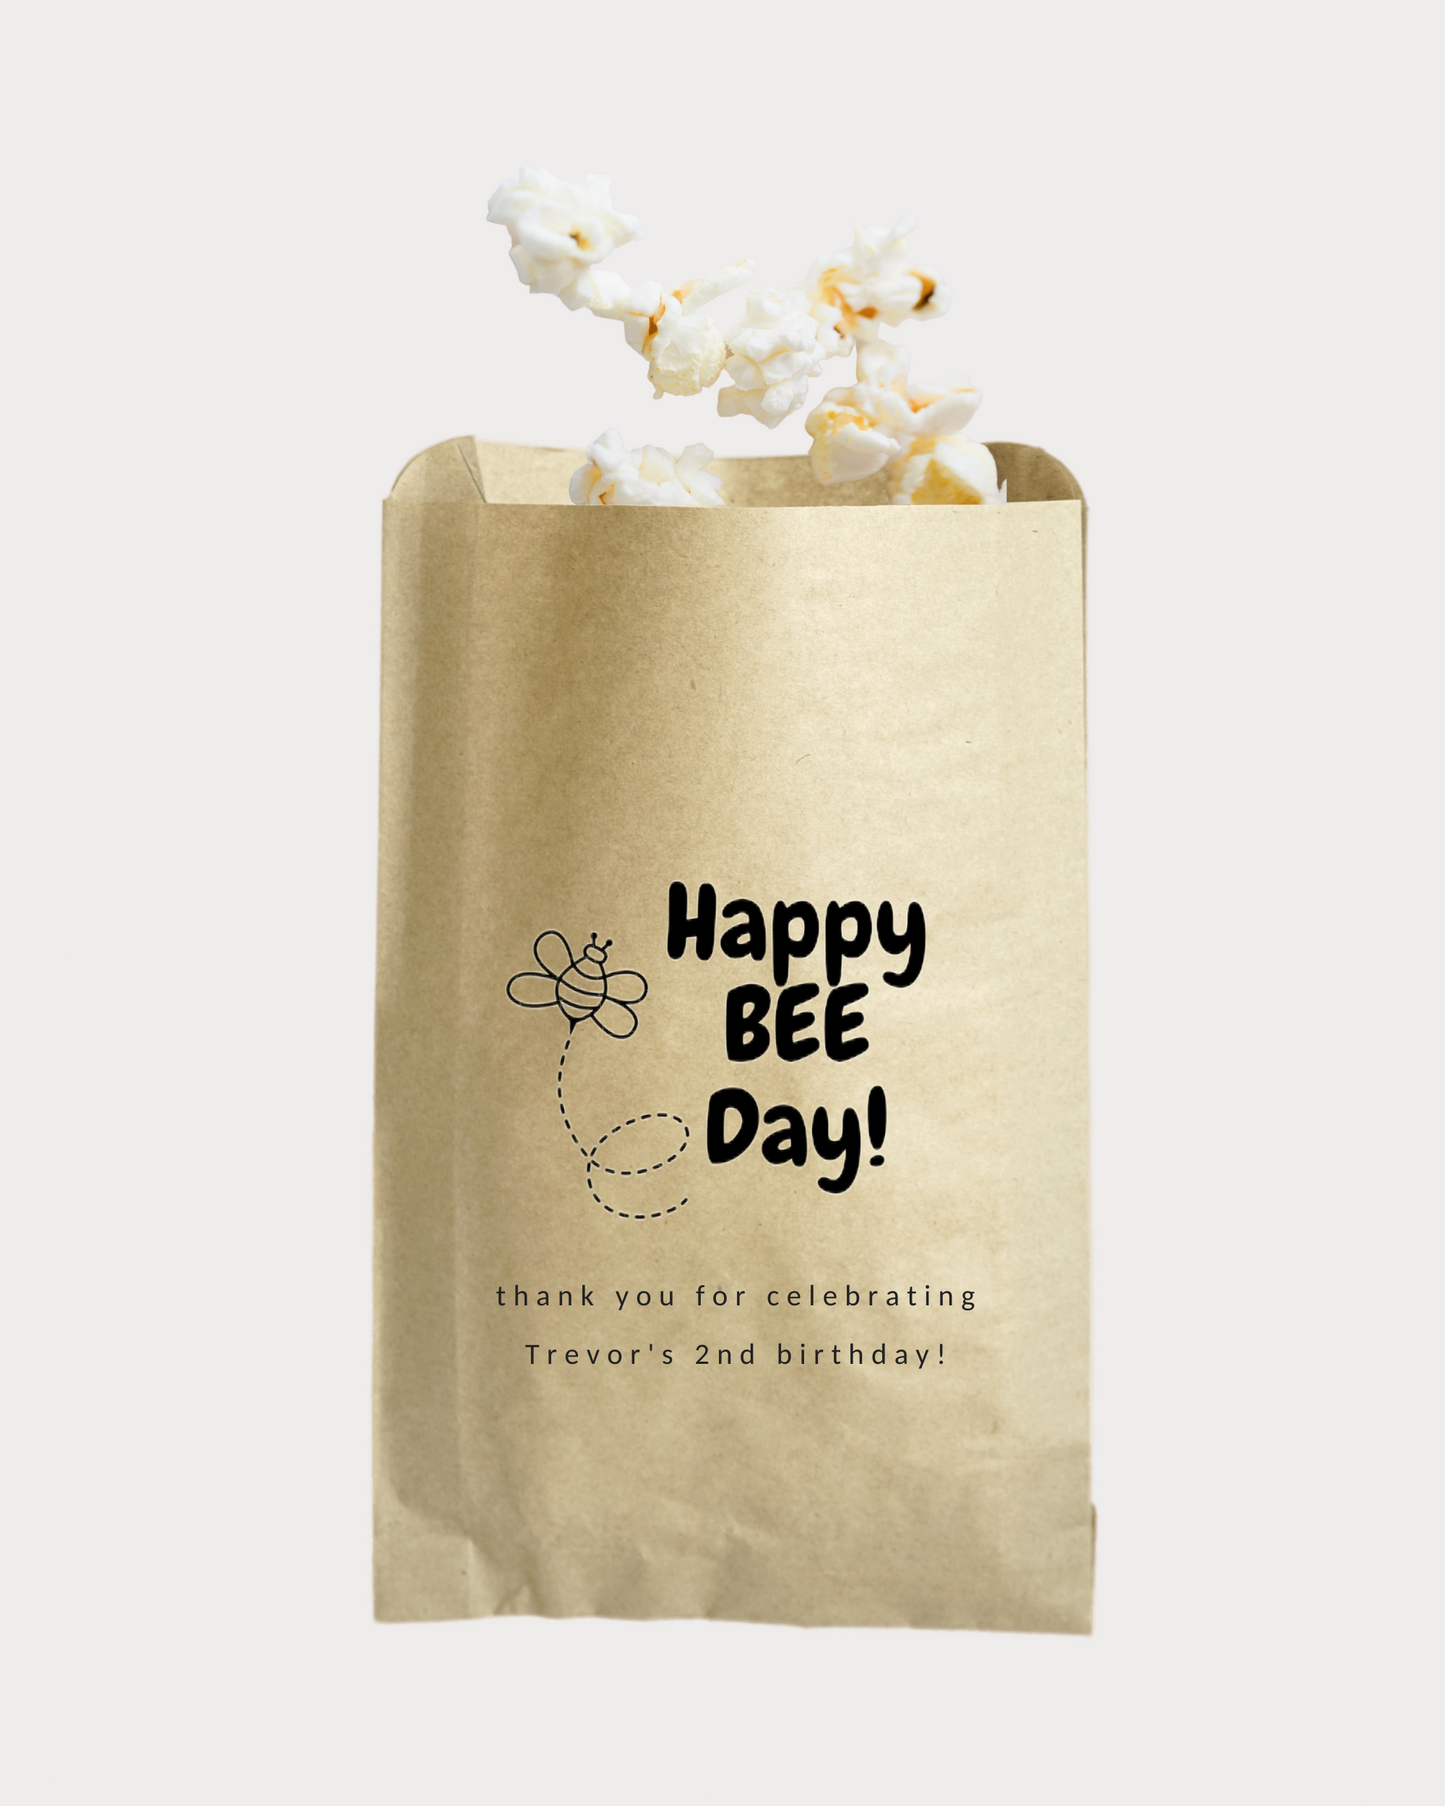 Personalized Happy "Bee" Day party favor bags. Perfect for celebrating a party with the bumblebee theme. Bags are available in two sizes - 5x8" and 6x9" in kraft brown color.